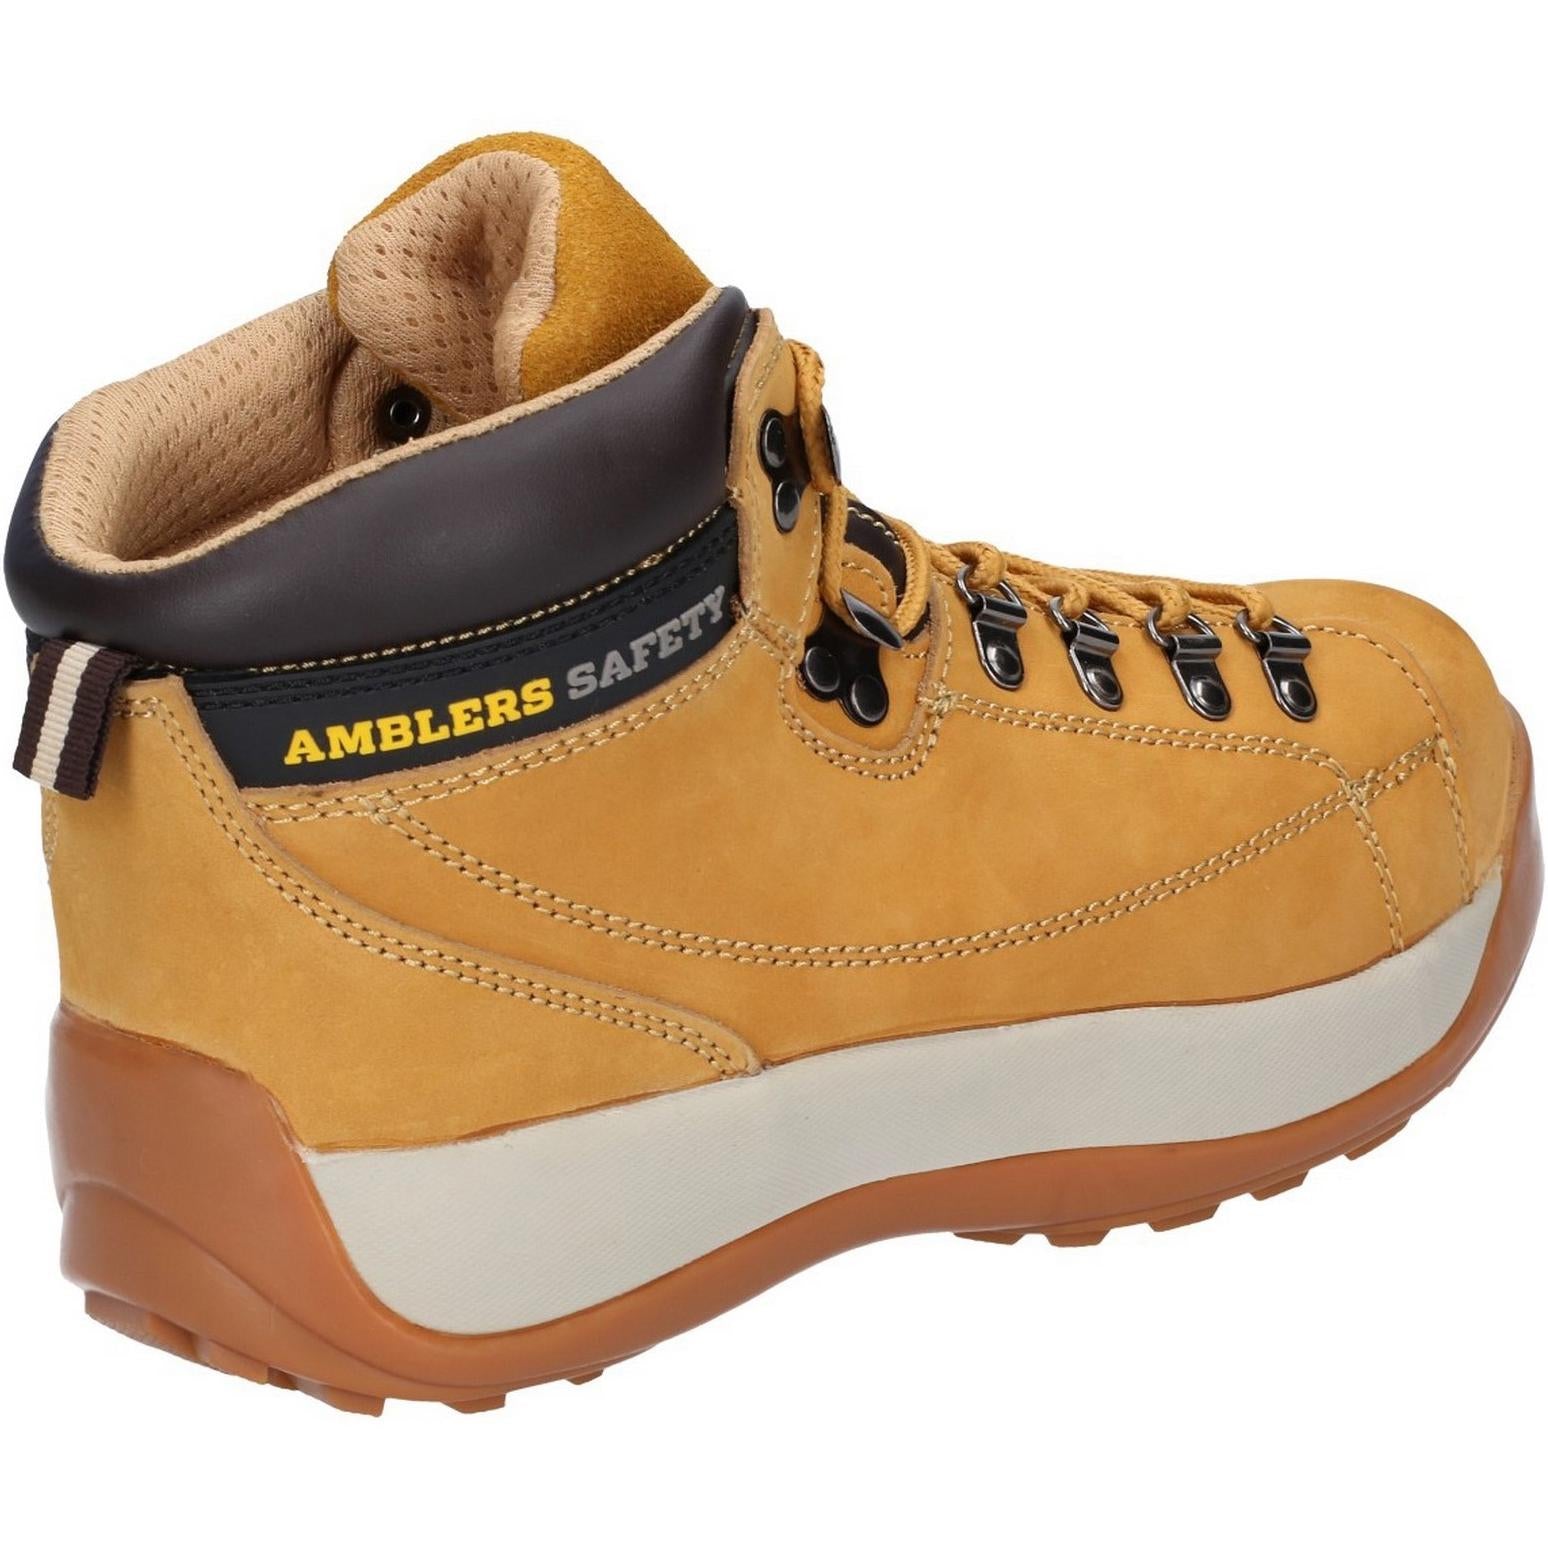 Amblers Safety FS122 Hardwearing Safety Boot